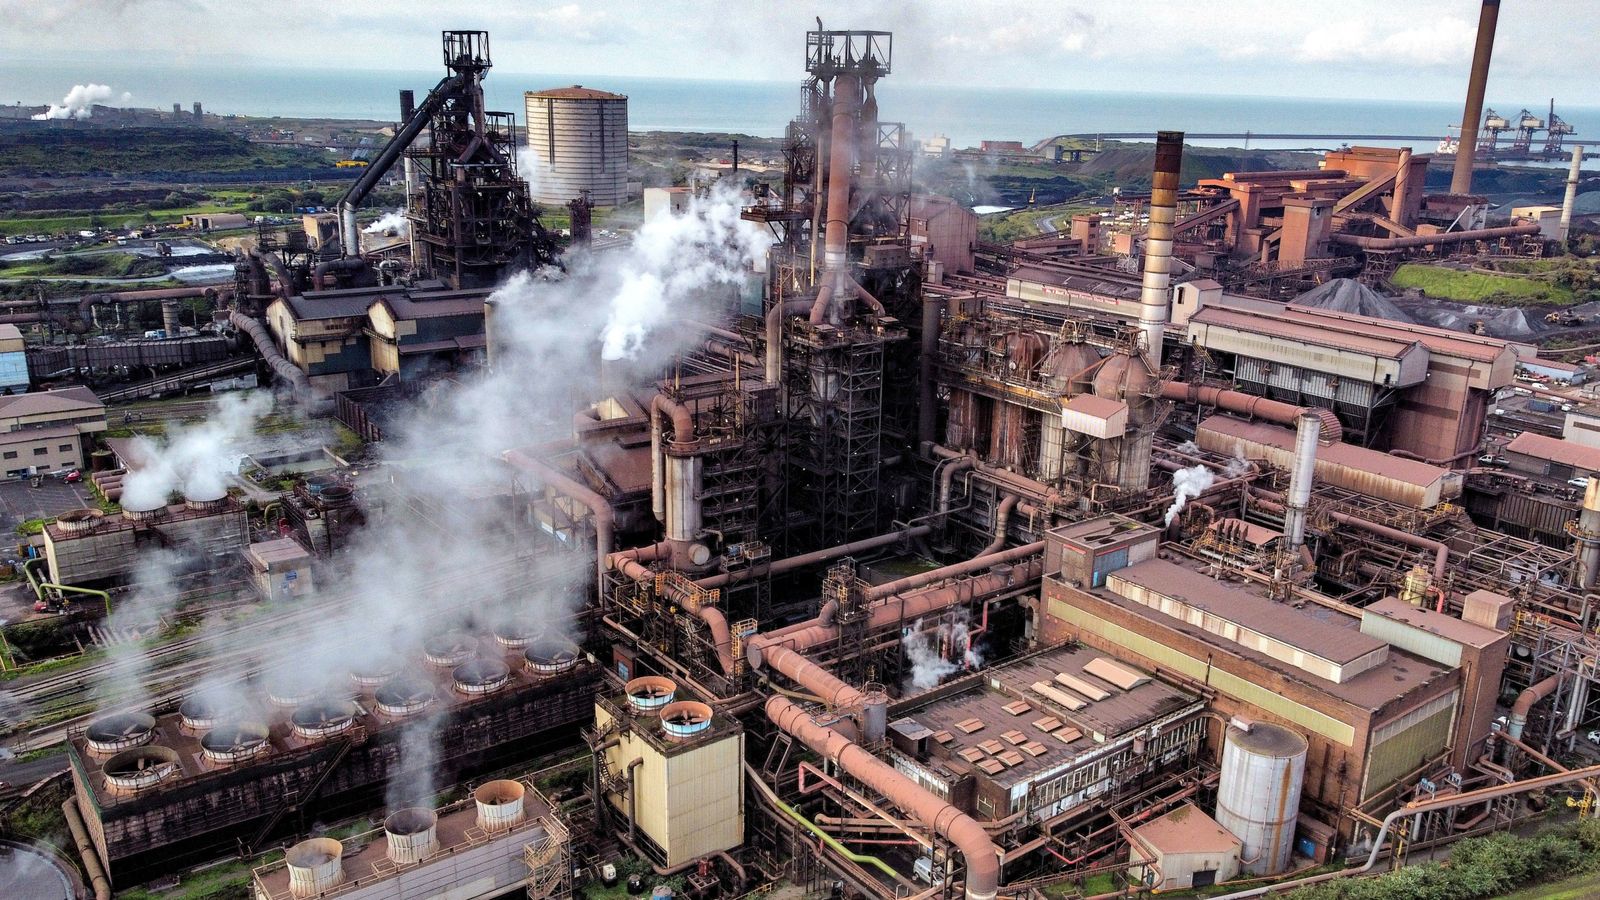 closure of port talbot steelworks 'will completely smash community to pieces'